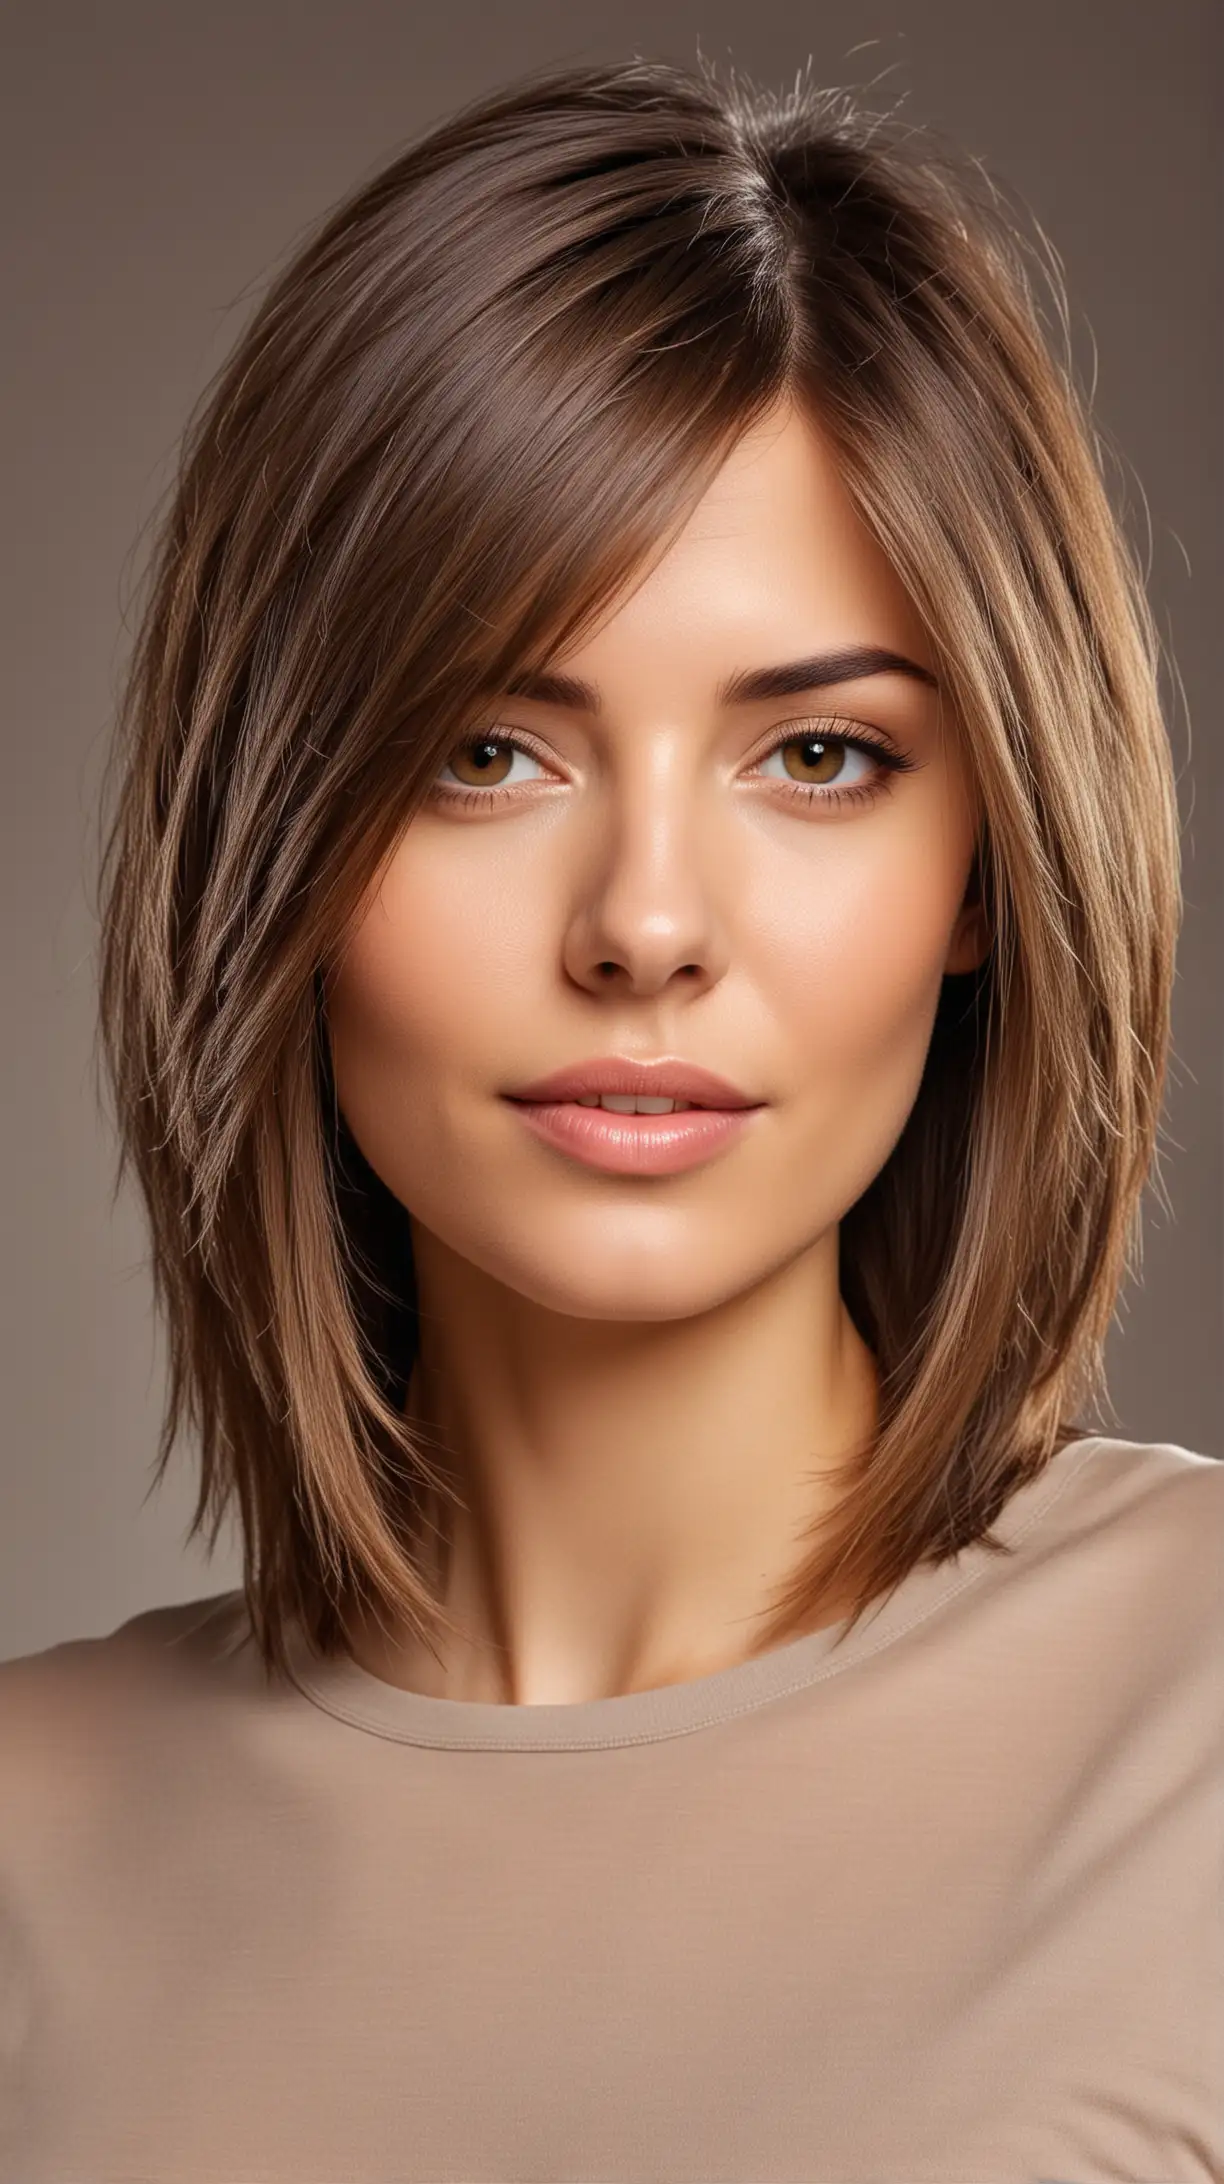 Beautiful girl model, haircut - Smooth and Sleek Layered Cut, medium length haircut with layers, age 30 years, background - casual